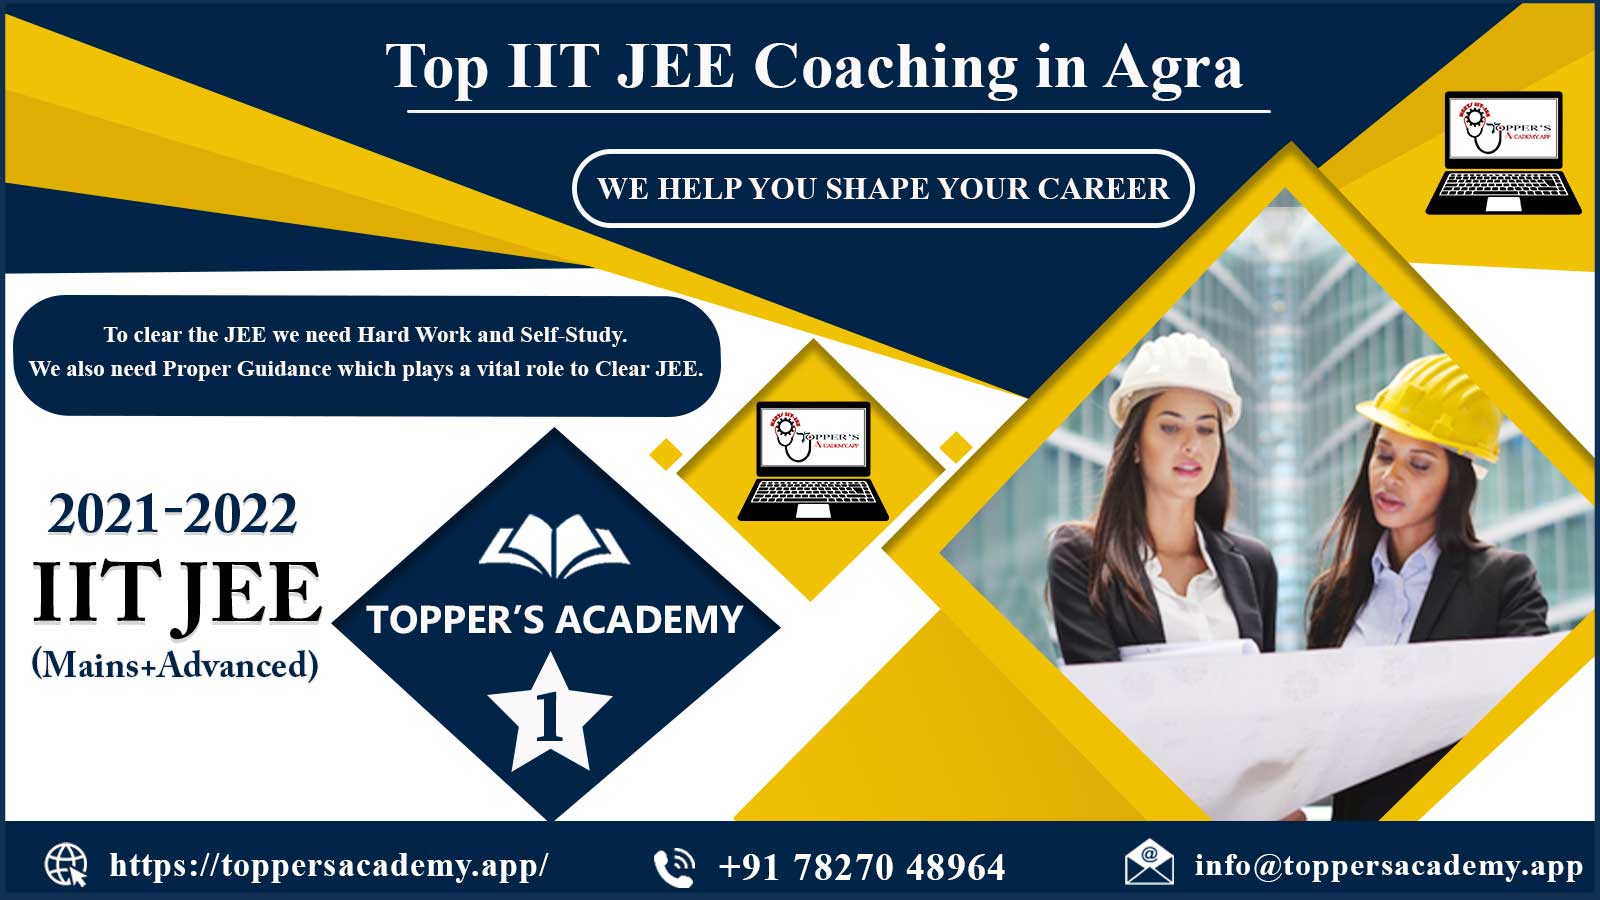 Toppers Academy IIT JEE Coaching in Agra